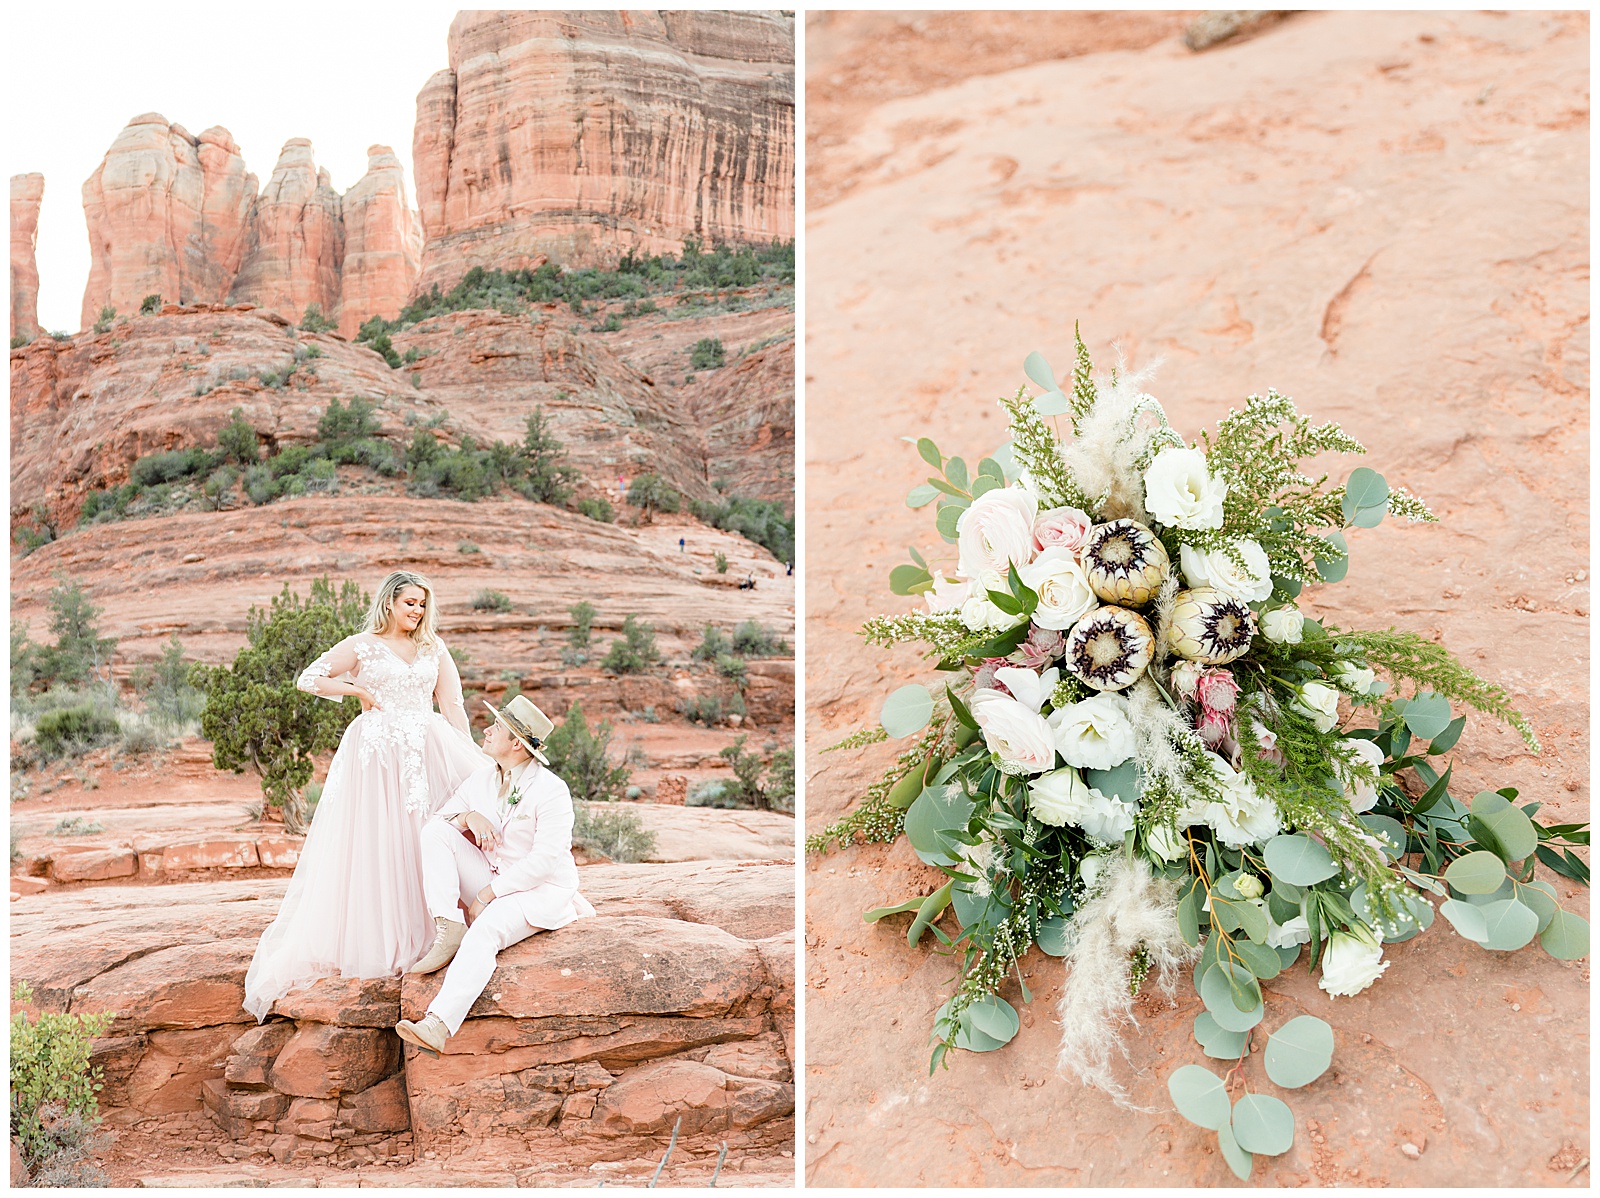 Floral bouquet from Sedona Mountain High Flowers and a bride standing next to her groom